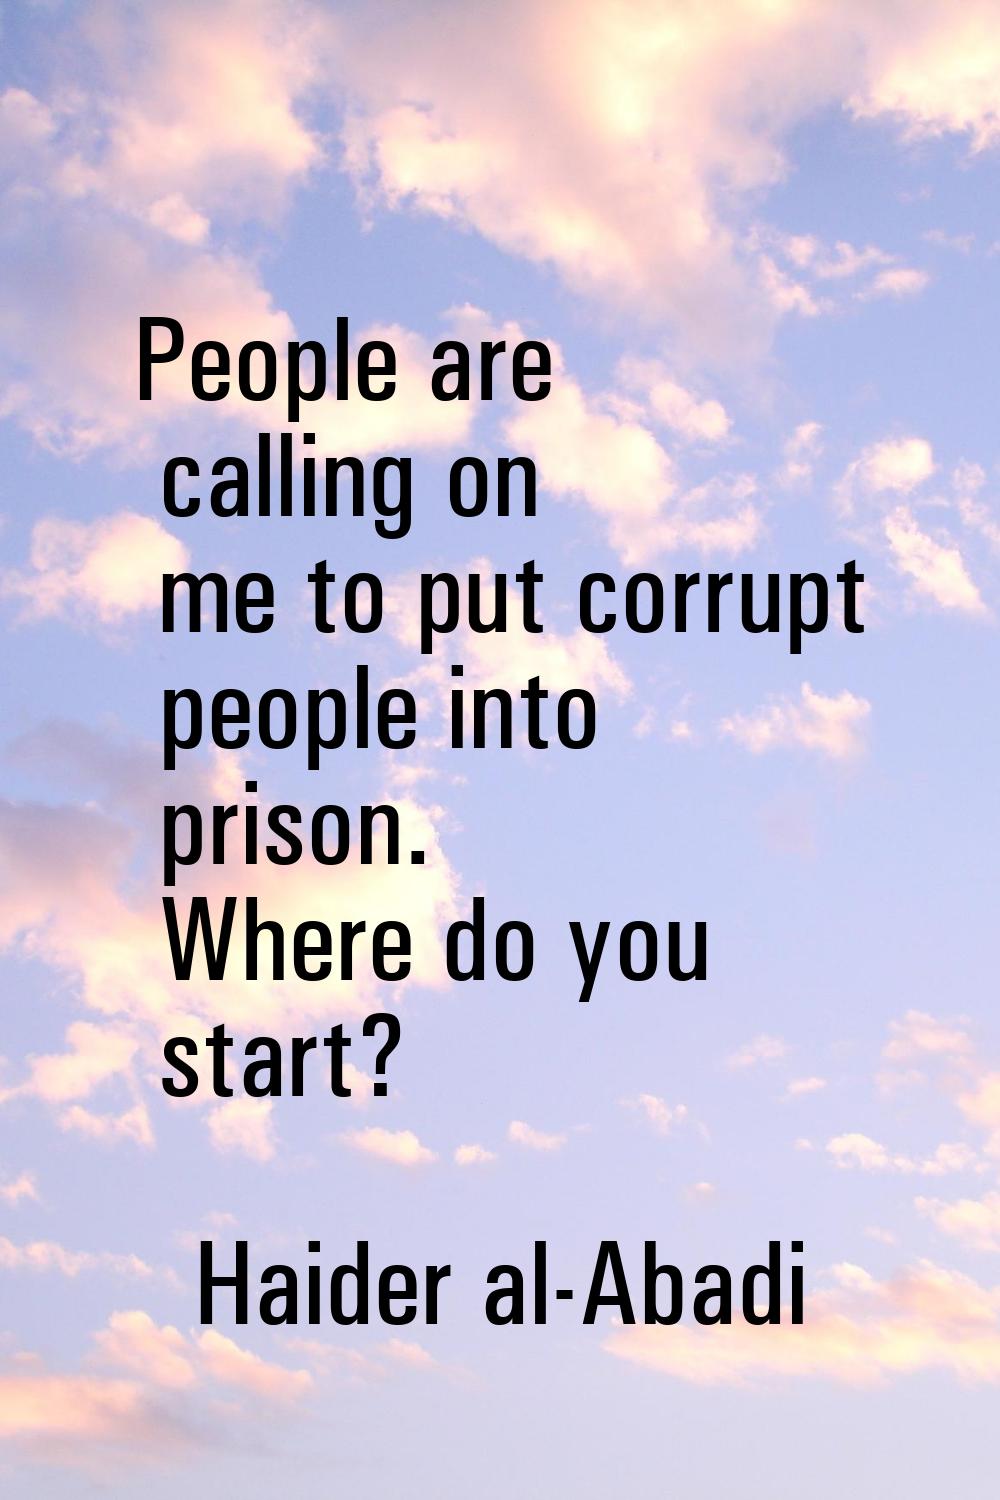 People are calling on me to put corrupt people into prison. Where do you start?